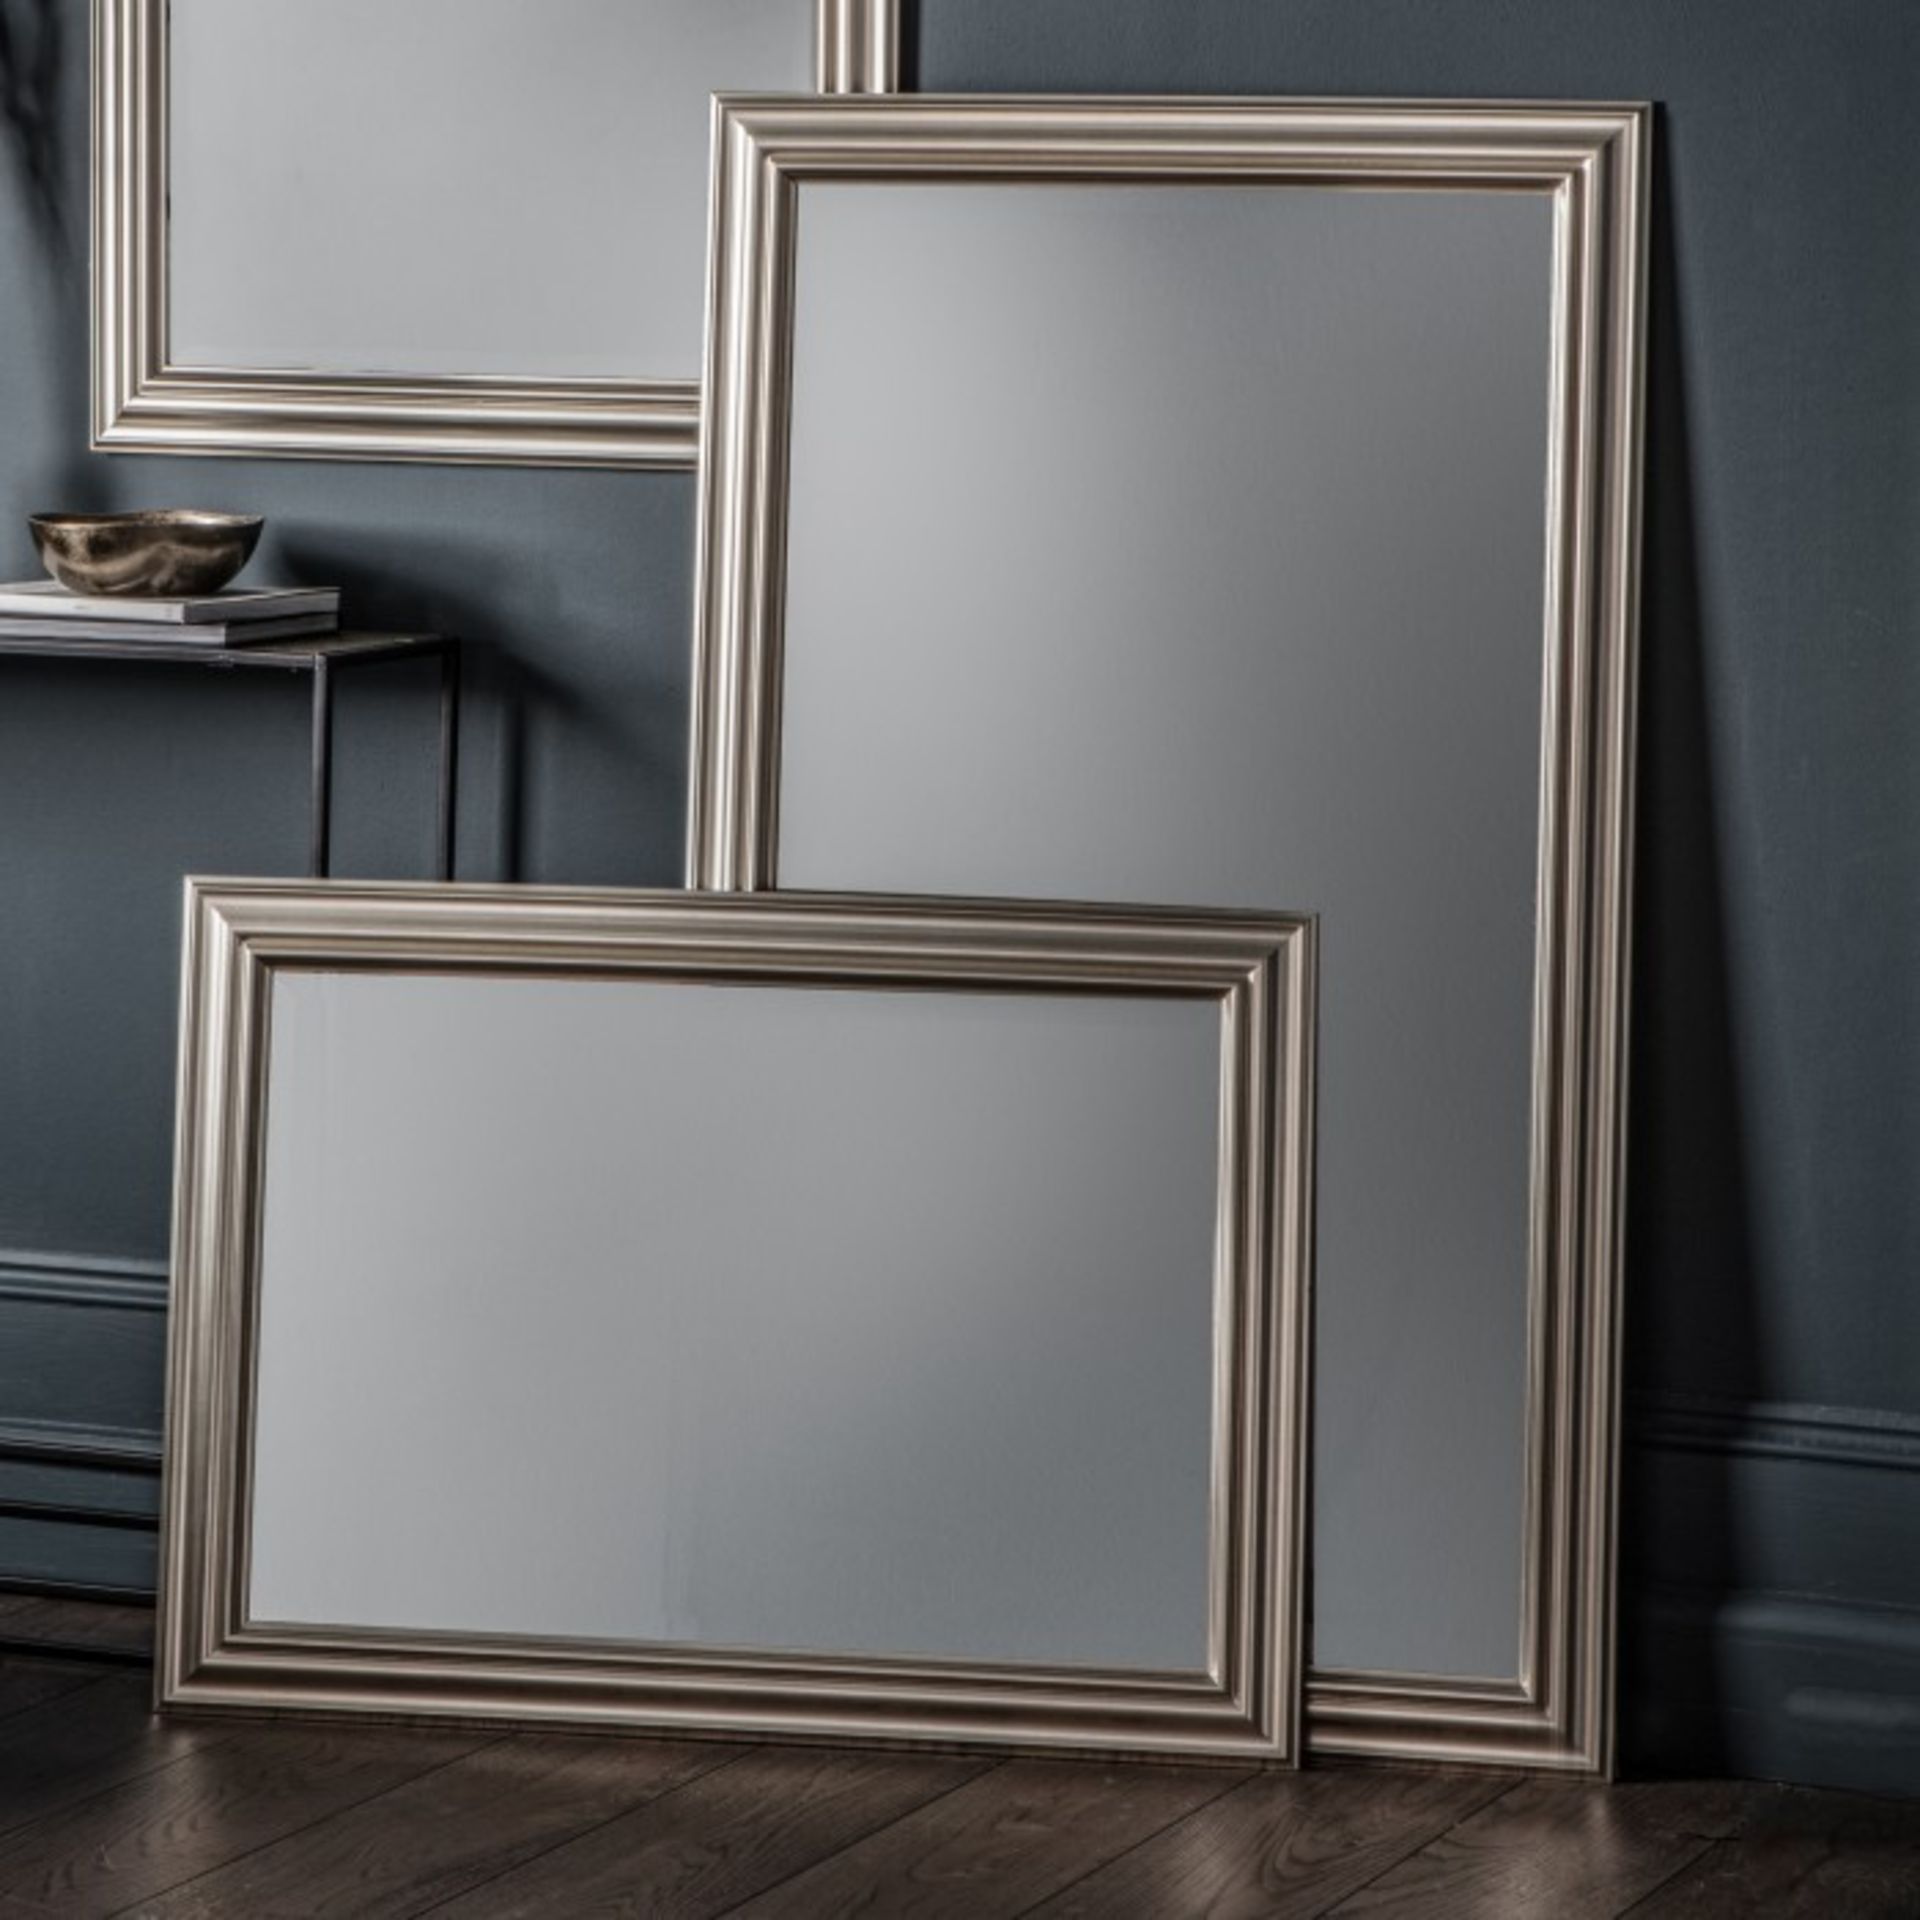 Hendrix Mirror Champagne Complete That Look You Have Been Wanting With This Stunning Award Winning